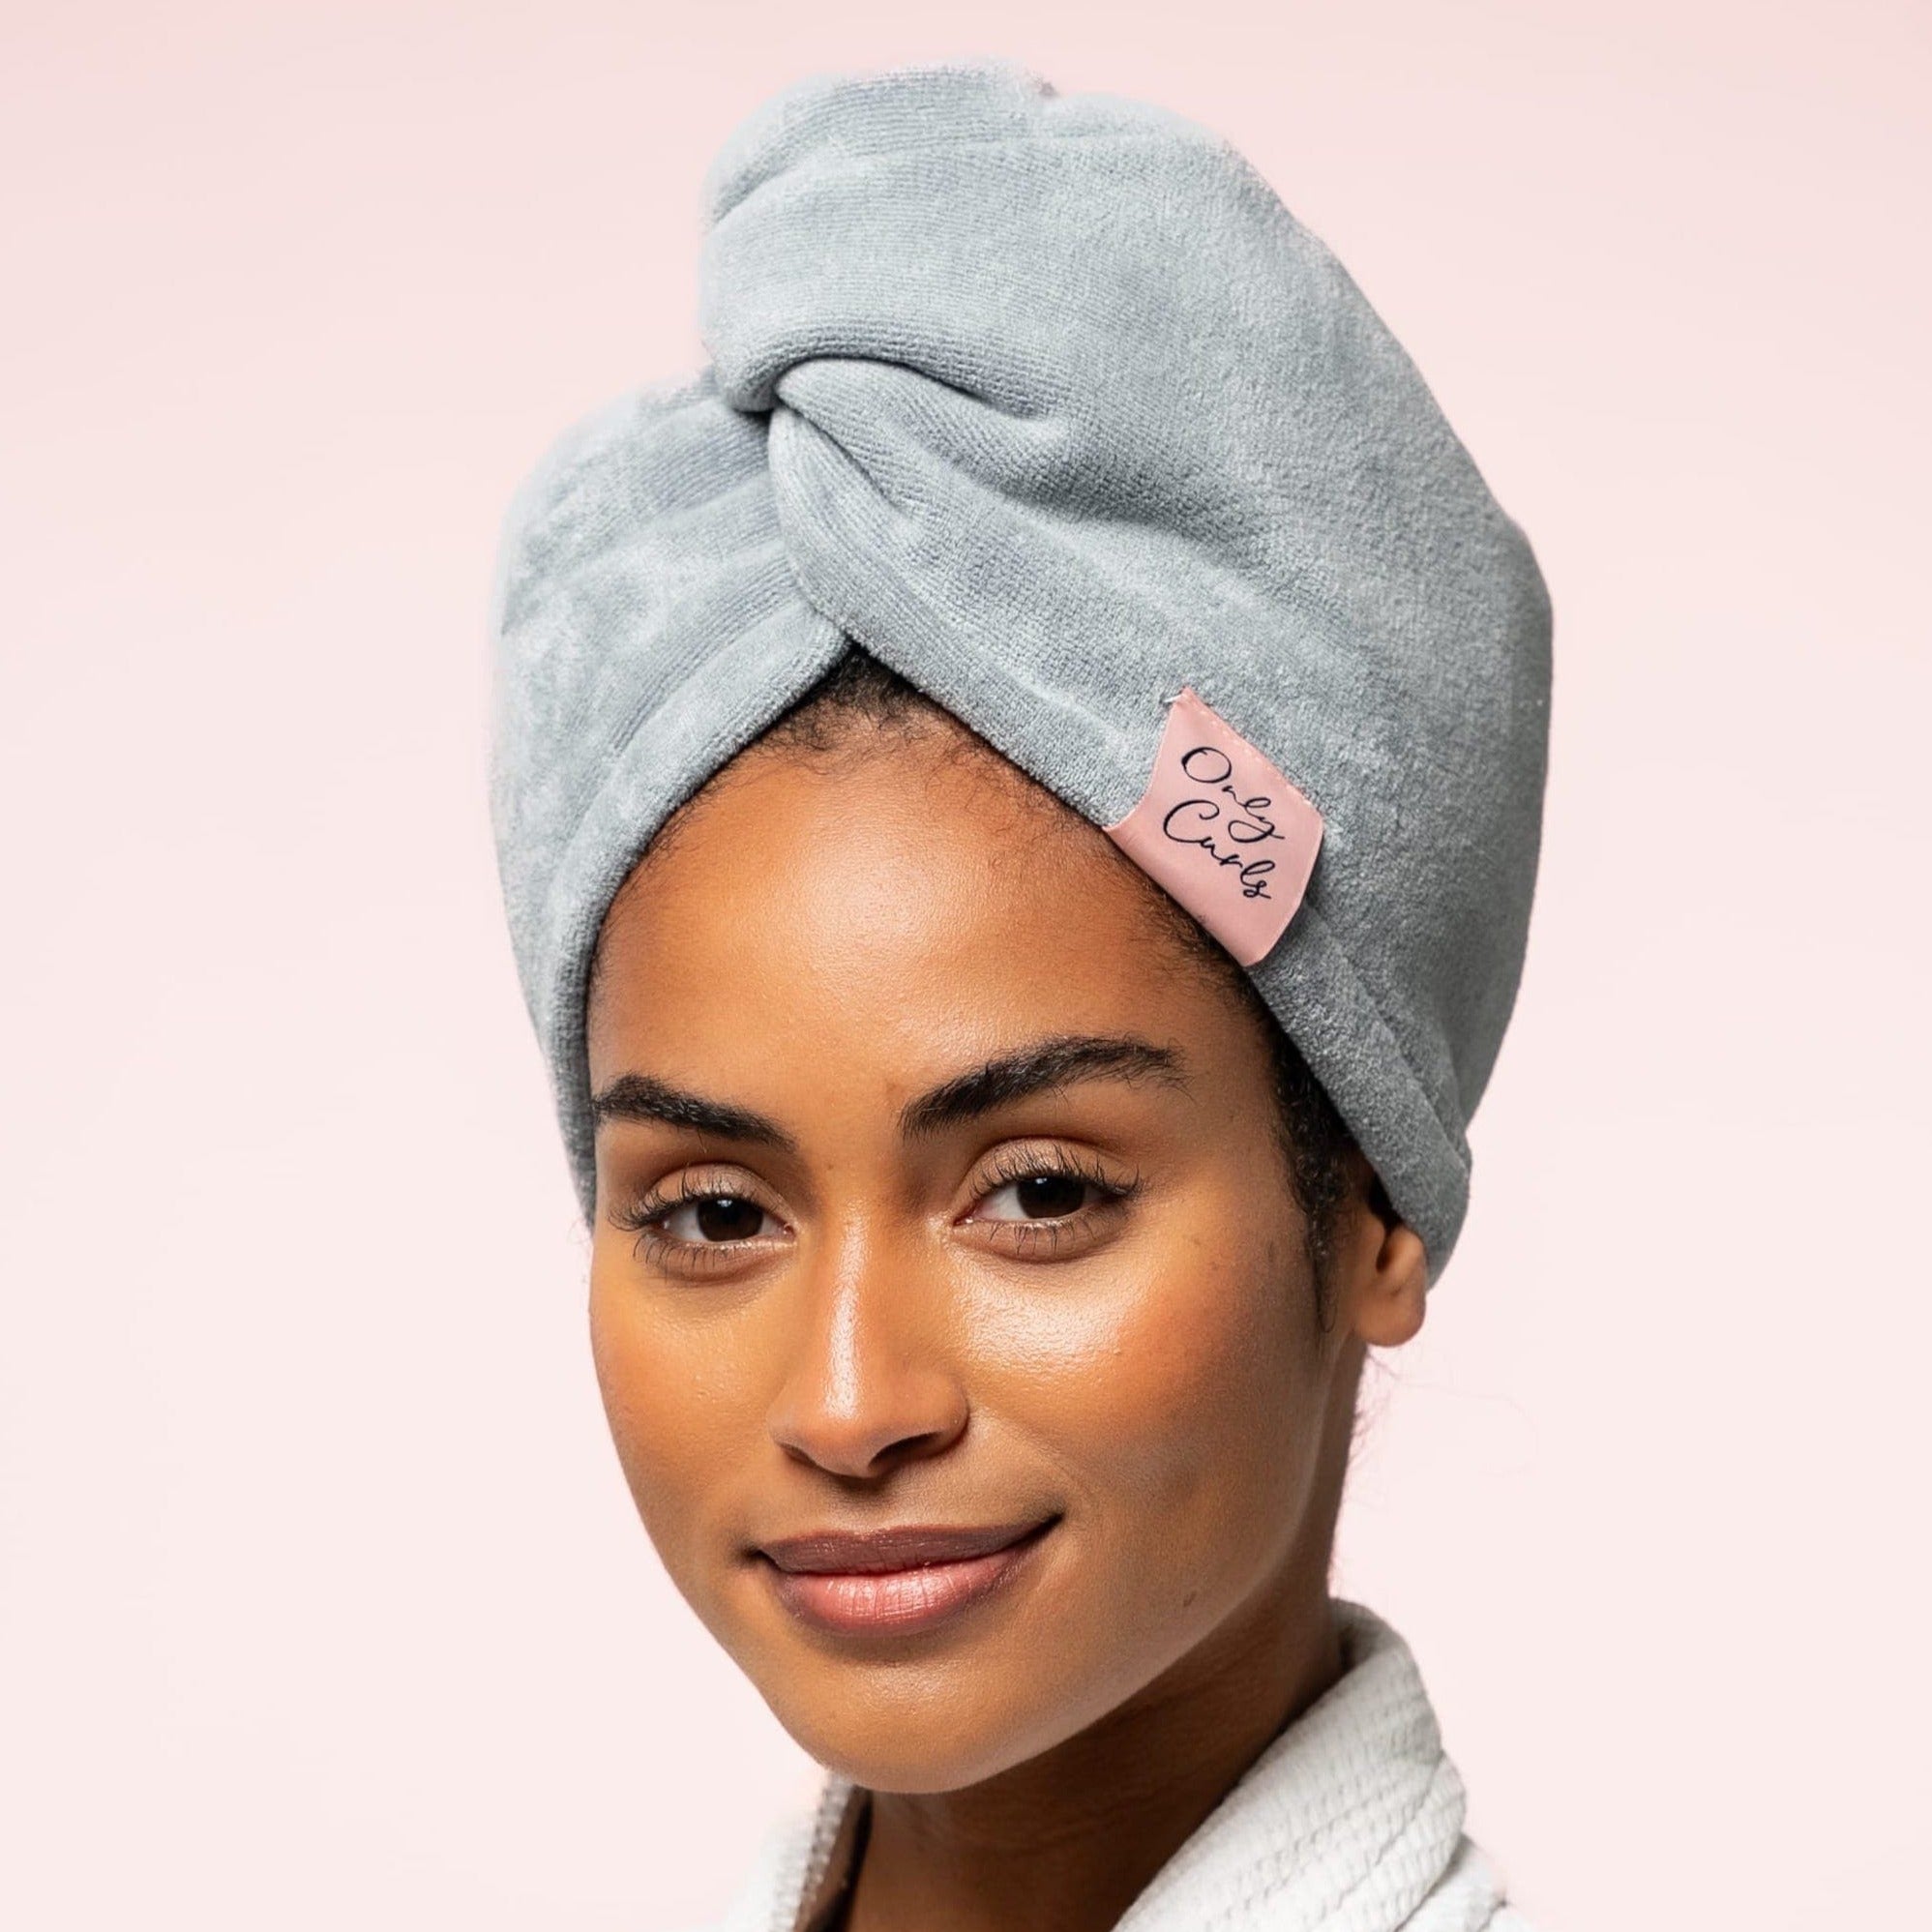 Only Curls Towel Turban - Grey - Only Curls